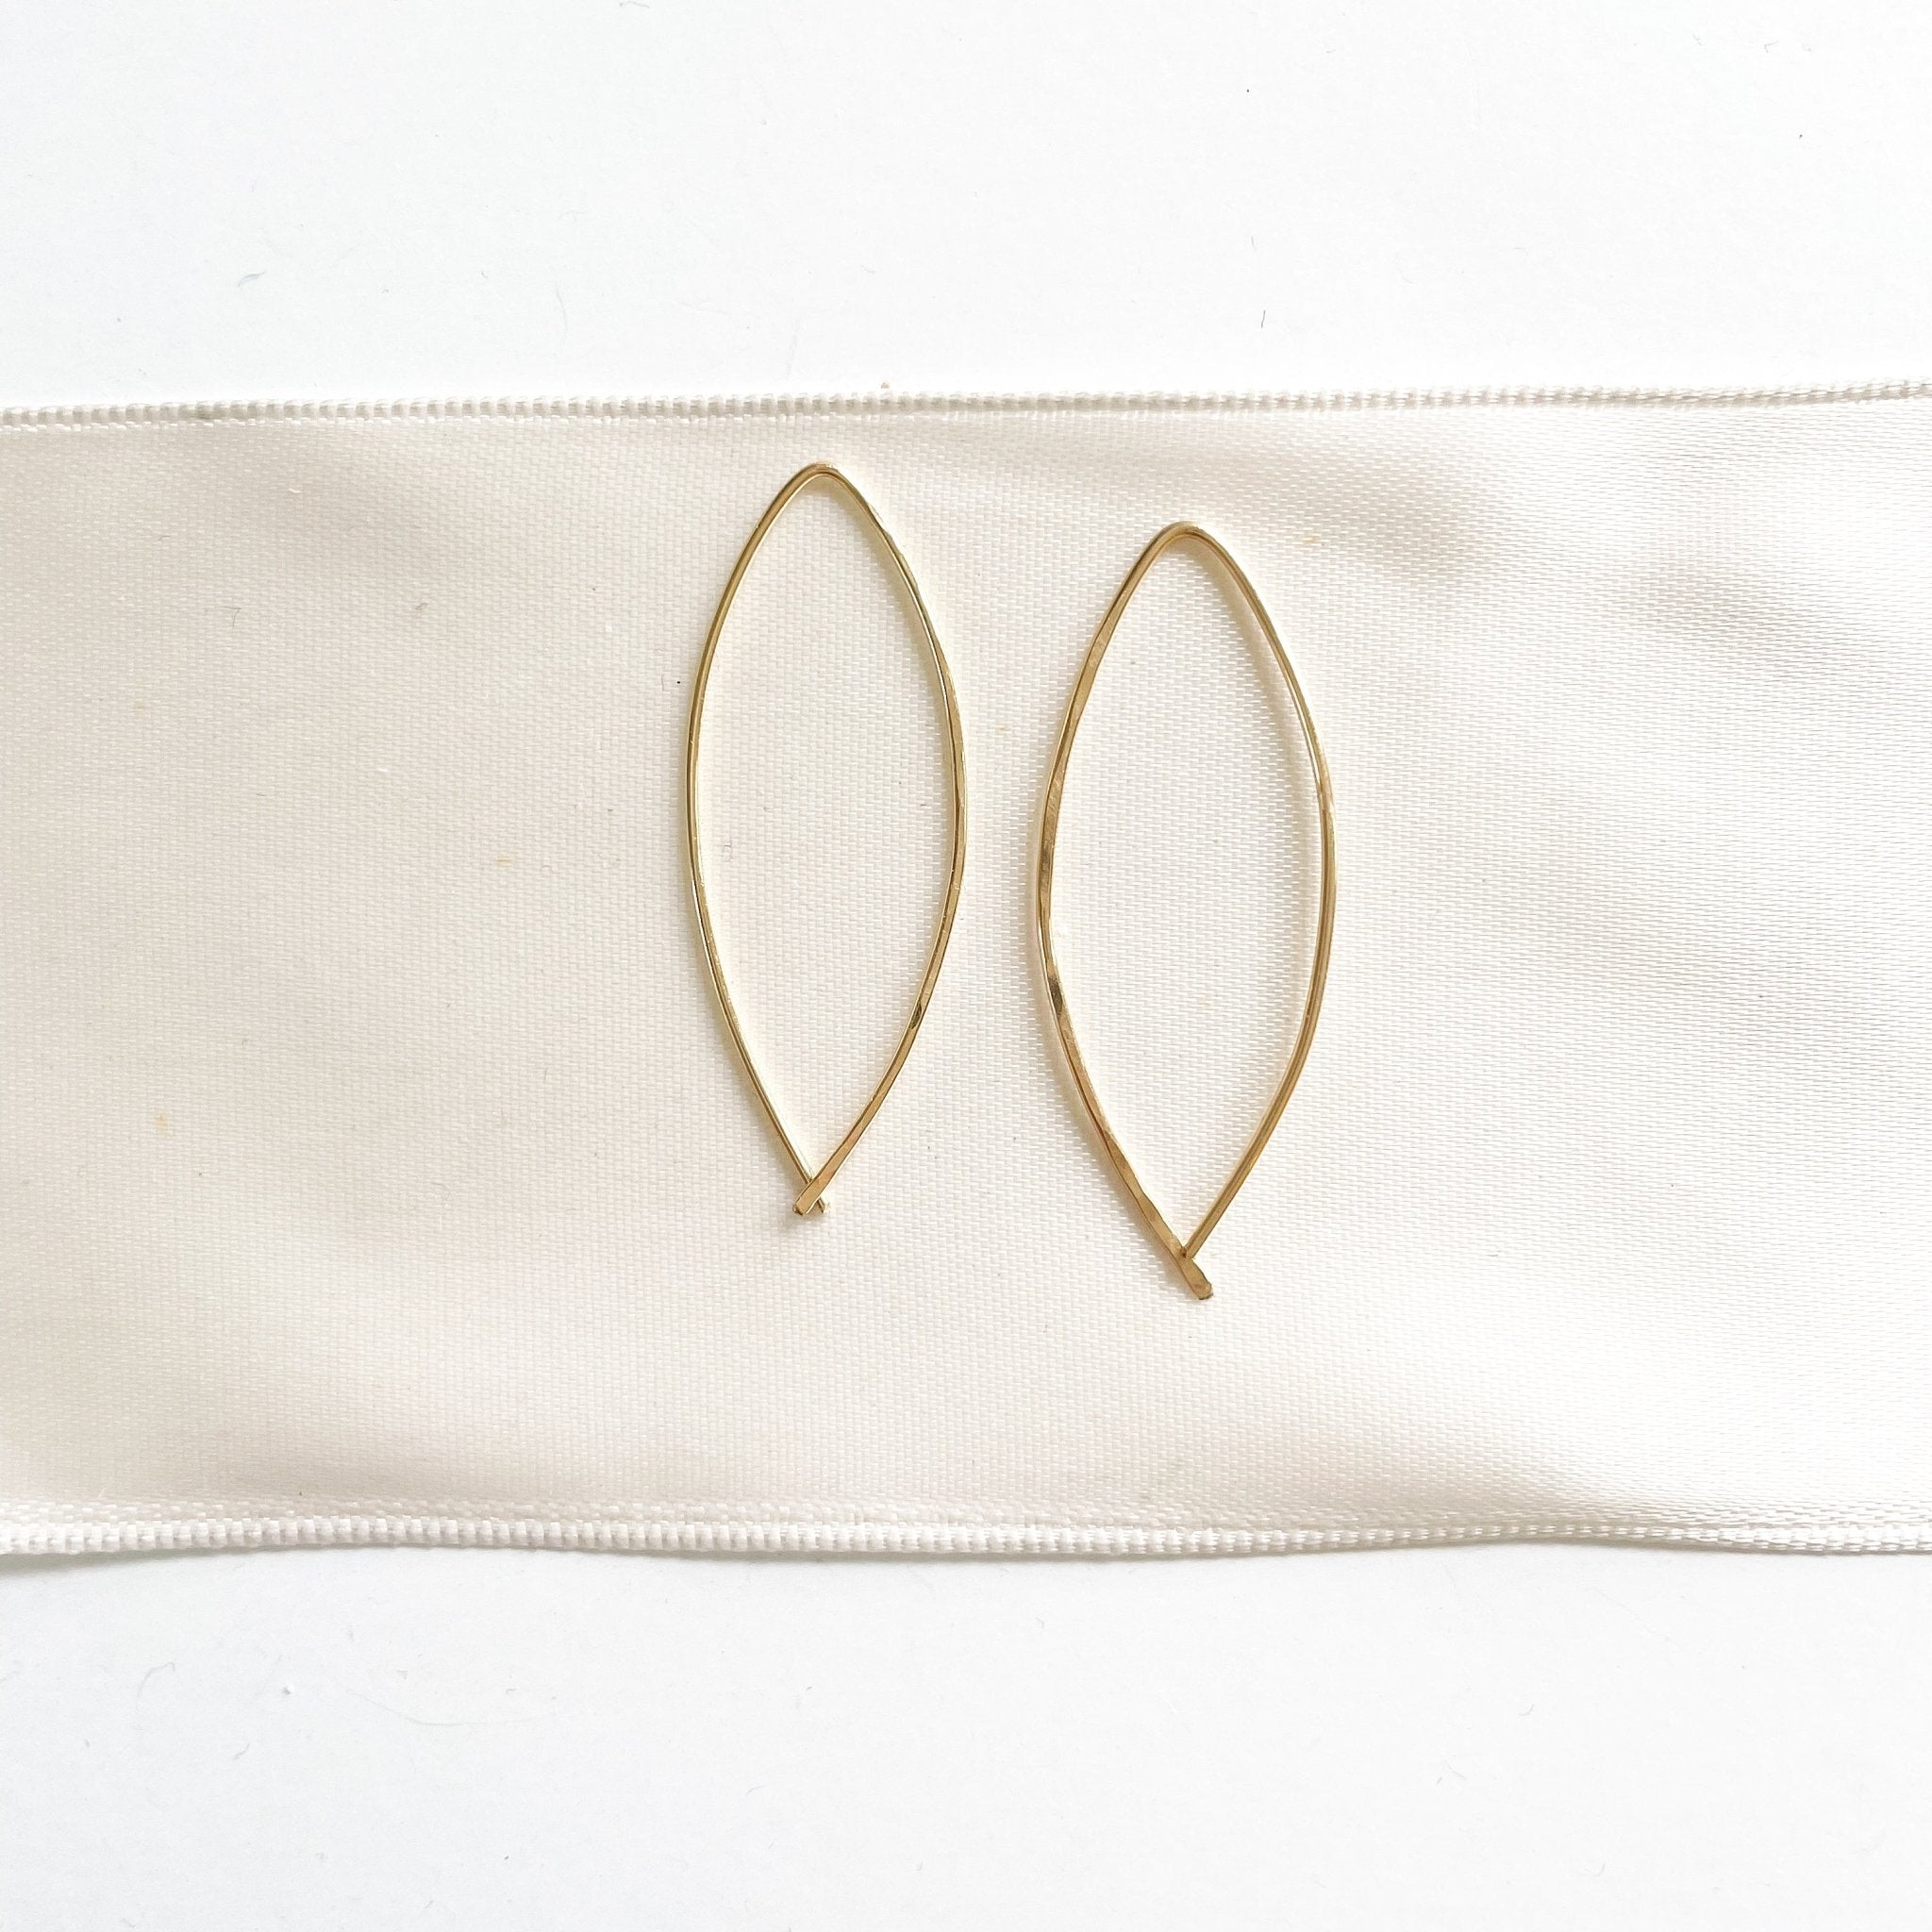 Alice Earrings by Sarah Cornwell Jewelry. Simple lightweight gold threader earrings on white background.